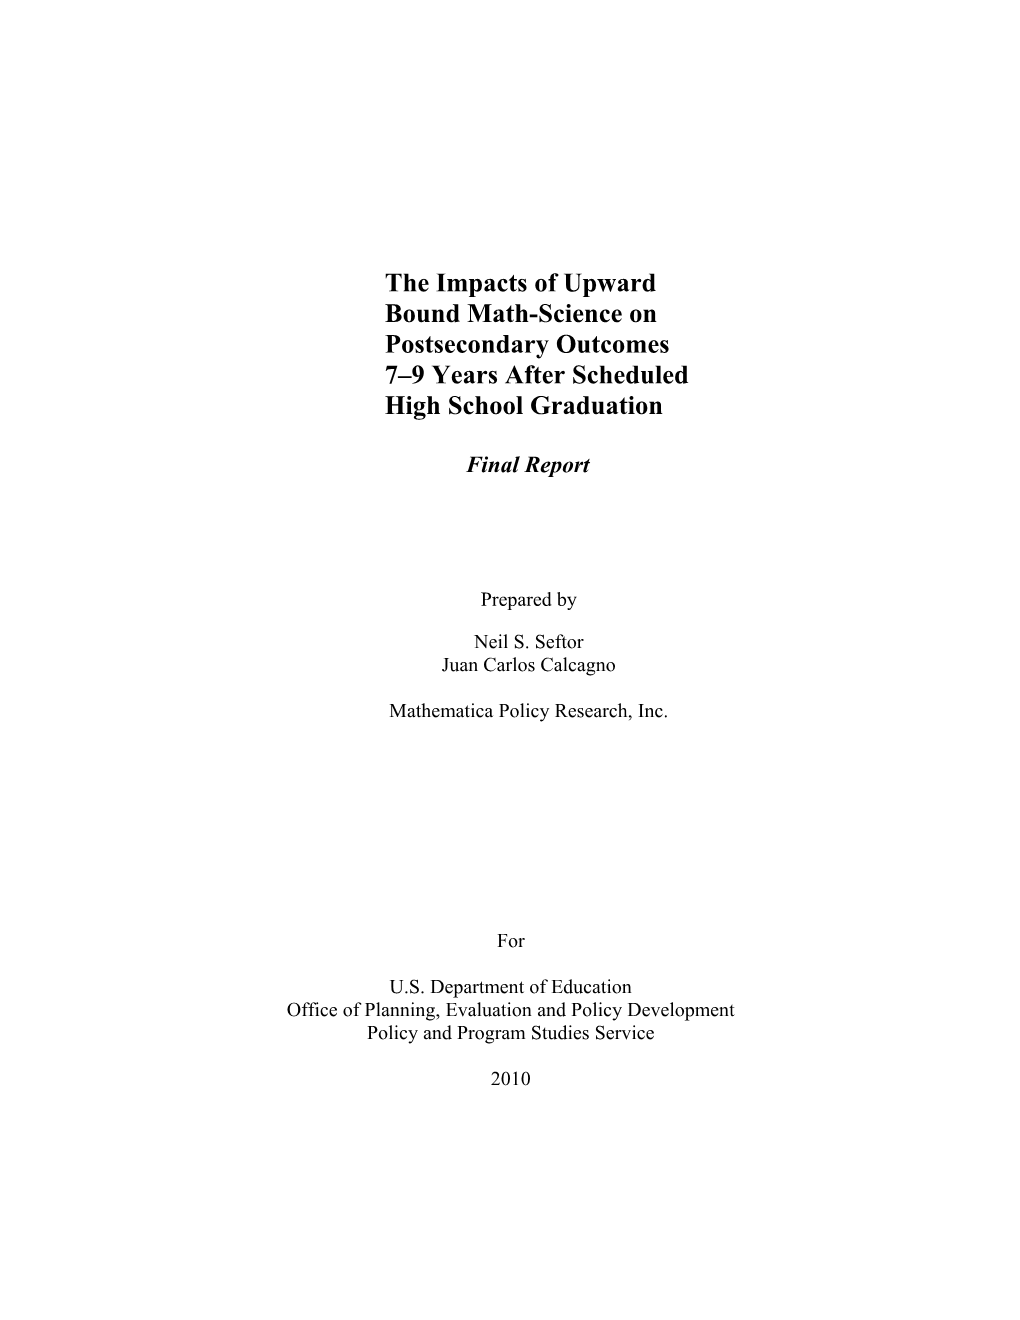 Final Report: the Impacts of Upward Bound Math-Science on Postsecondary Outcomes 7-9 Years